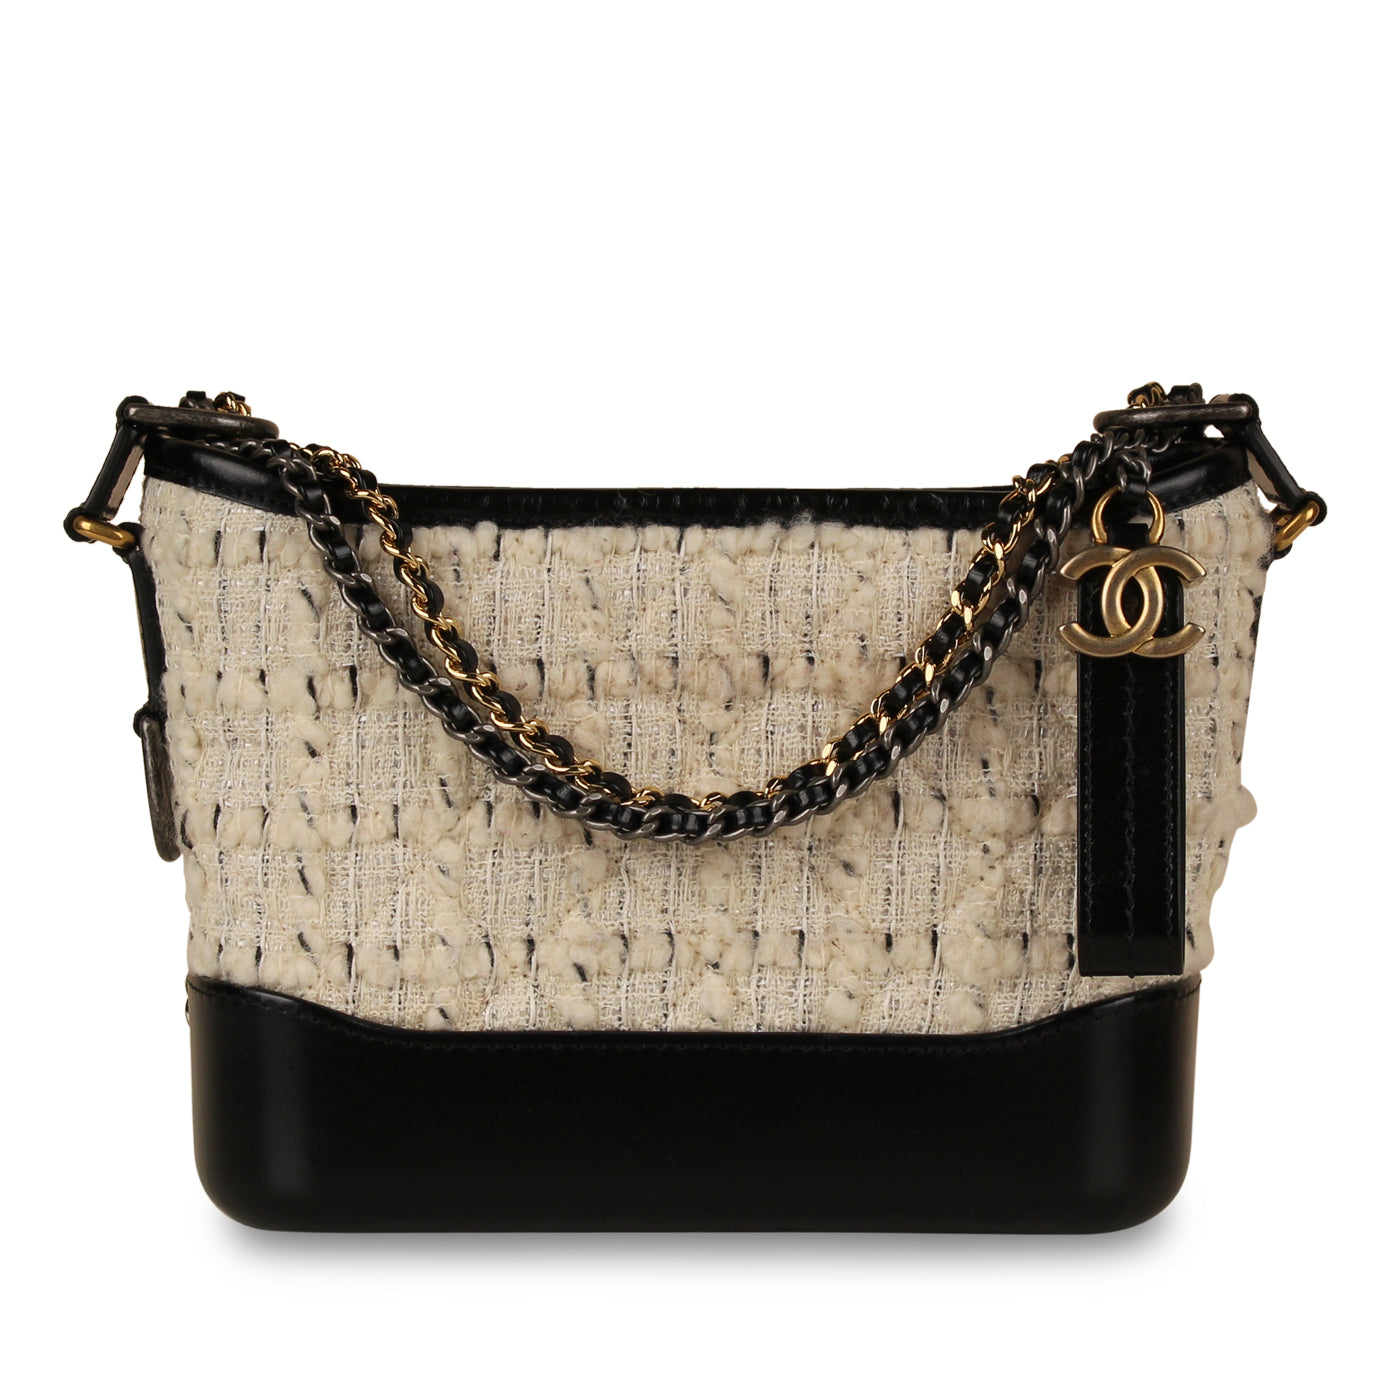 Chanel Small Gabrielle Hobo, Distressed Calfskin, Black GHW - Laulay Luxury